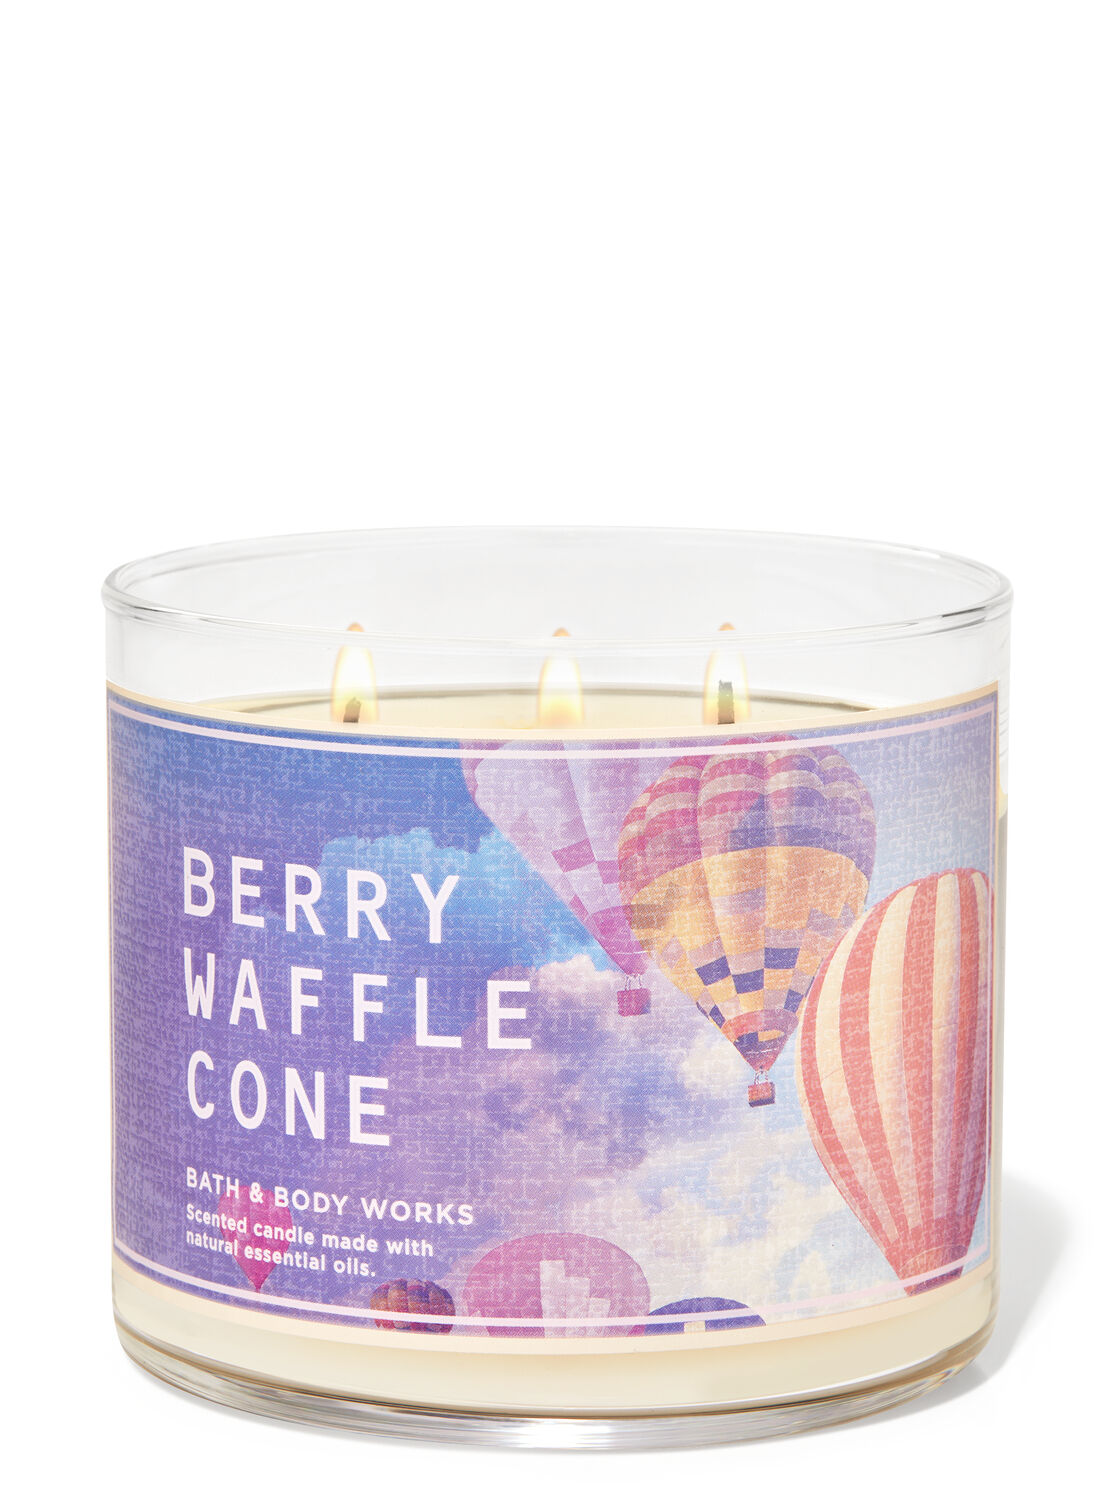 4 Bath & Body Works WAFFLE CONE Berry Large 3-Wick Scented Candle 14.5 oz 